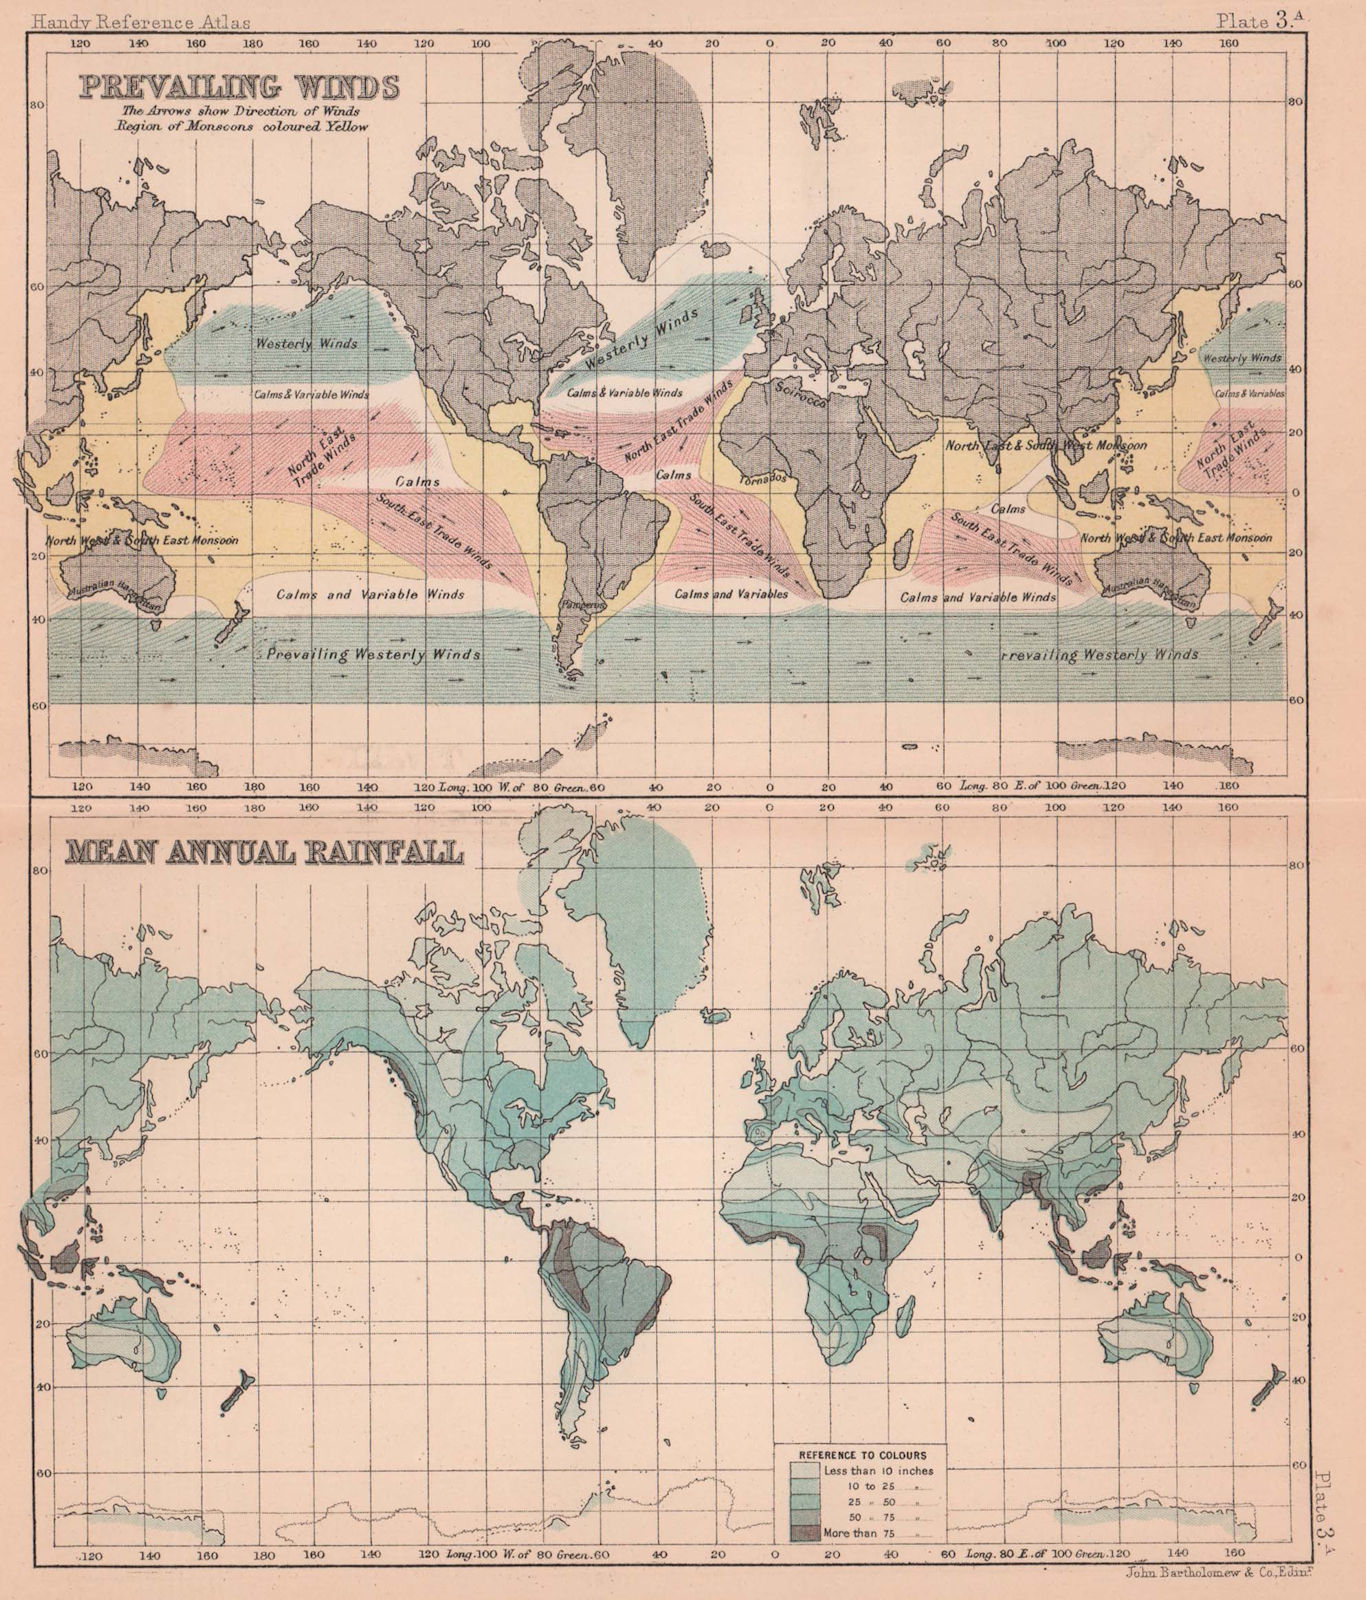 Prevailing Winds & Mean Annual rainfall. World. BARTHOLOMEW 1893 old map